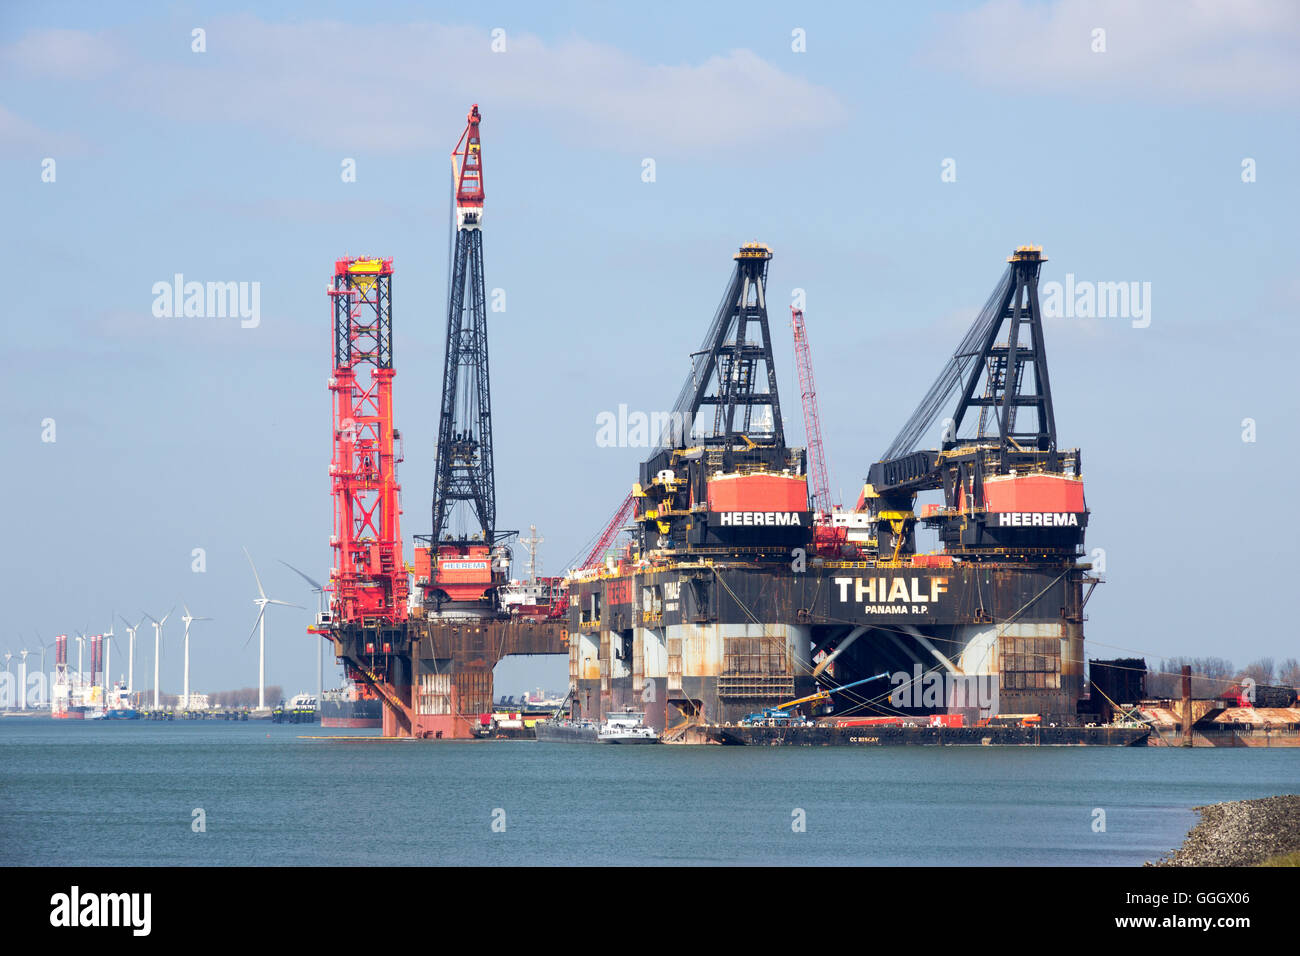 Thialf ,  a deepwater construction vessel, in the Port of Rotterdam Stock Photo